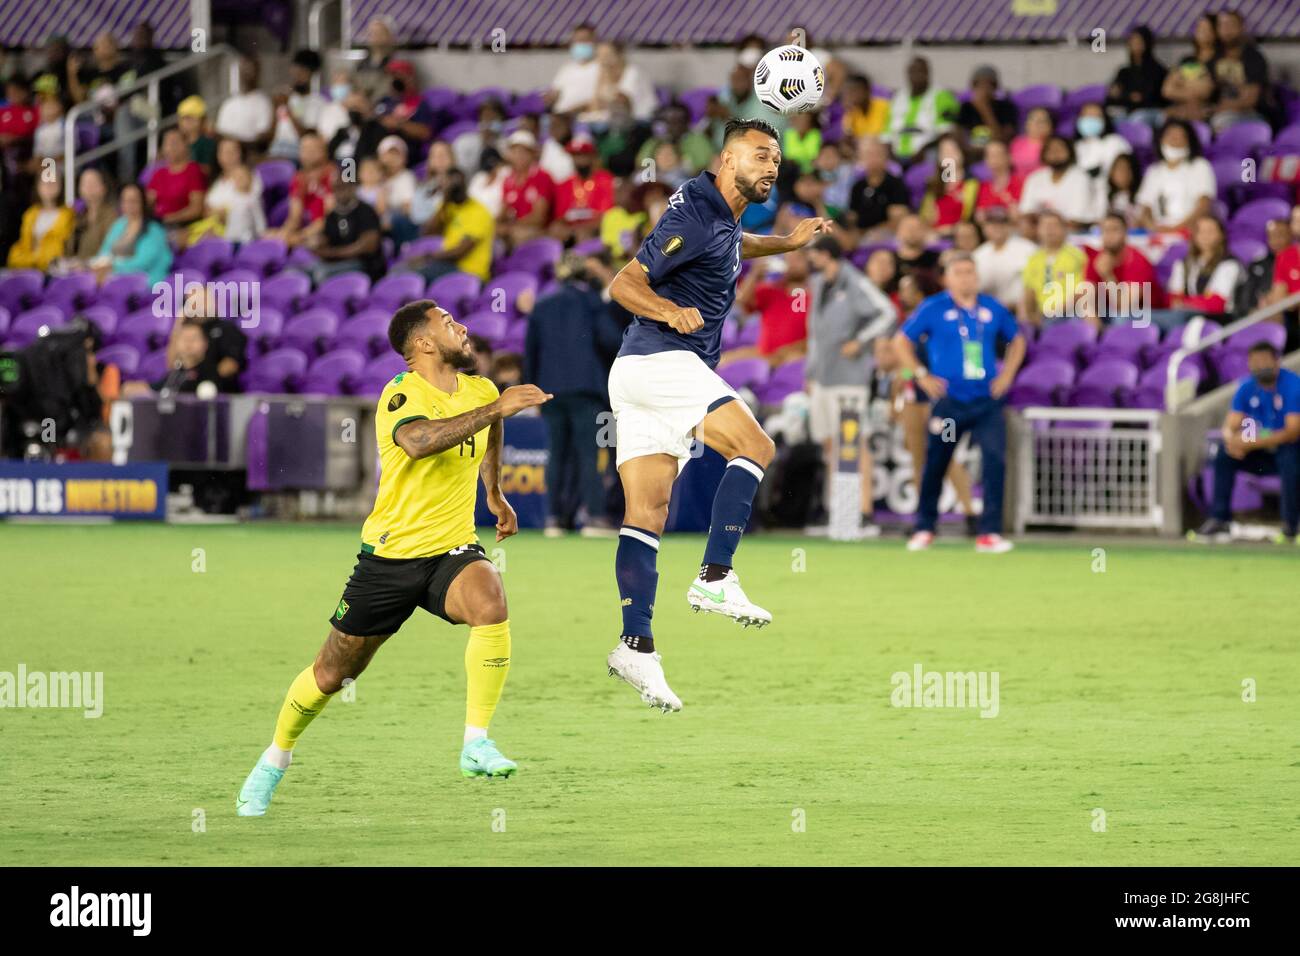 Orlando, United States. 21st July, 2021. Giancarlo Gonzalez (3 Costa Rica) heads the ball back to the goal keeper during the CONCACAF Gold Cup game between Costa Rica and Jamaica at Exploria Stadium in Orlando, Florida. NO COMMERCIAL USAGE. Credit: SPP Sport Press Photo. /Alamy Live News Stock Photo